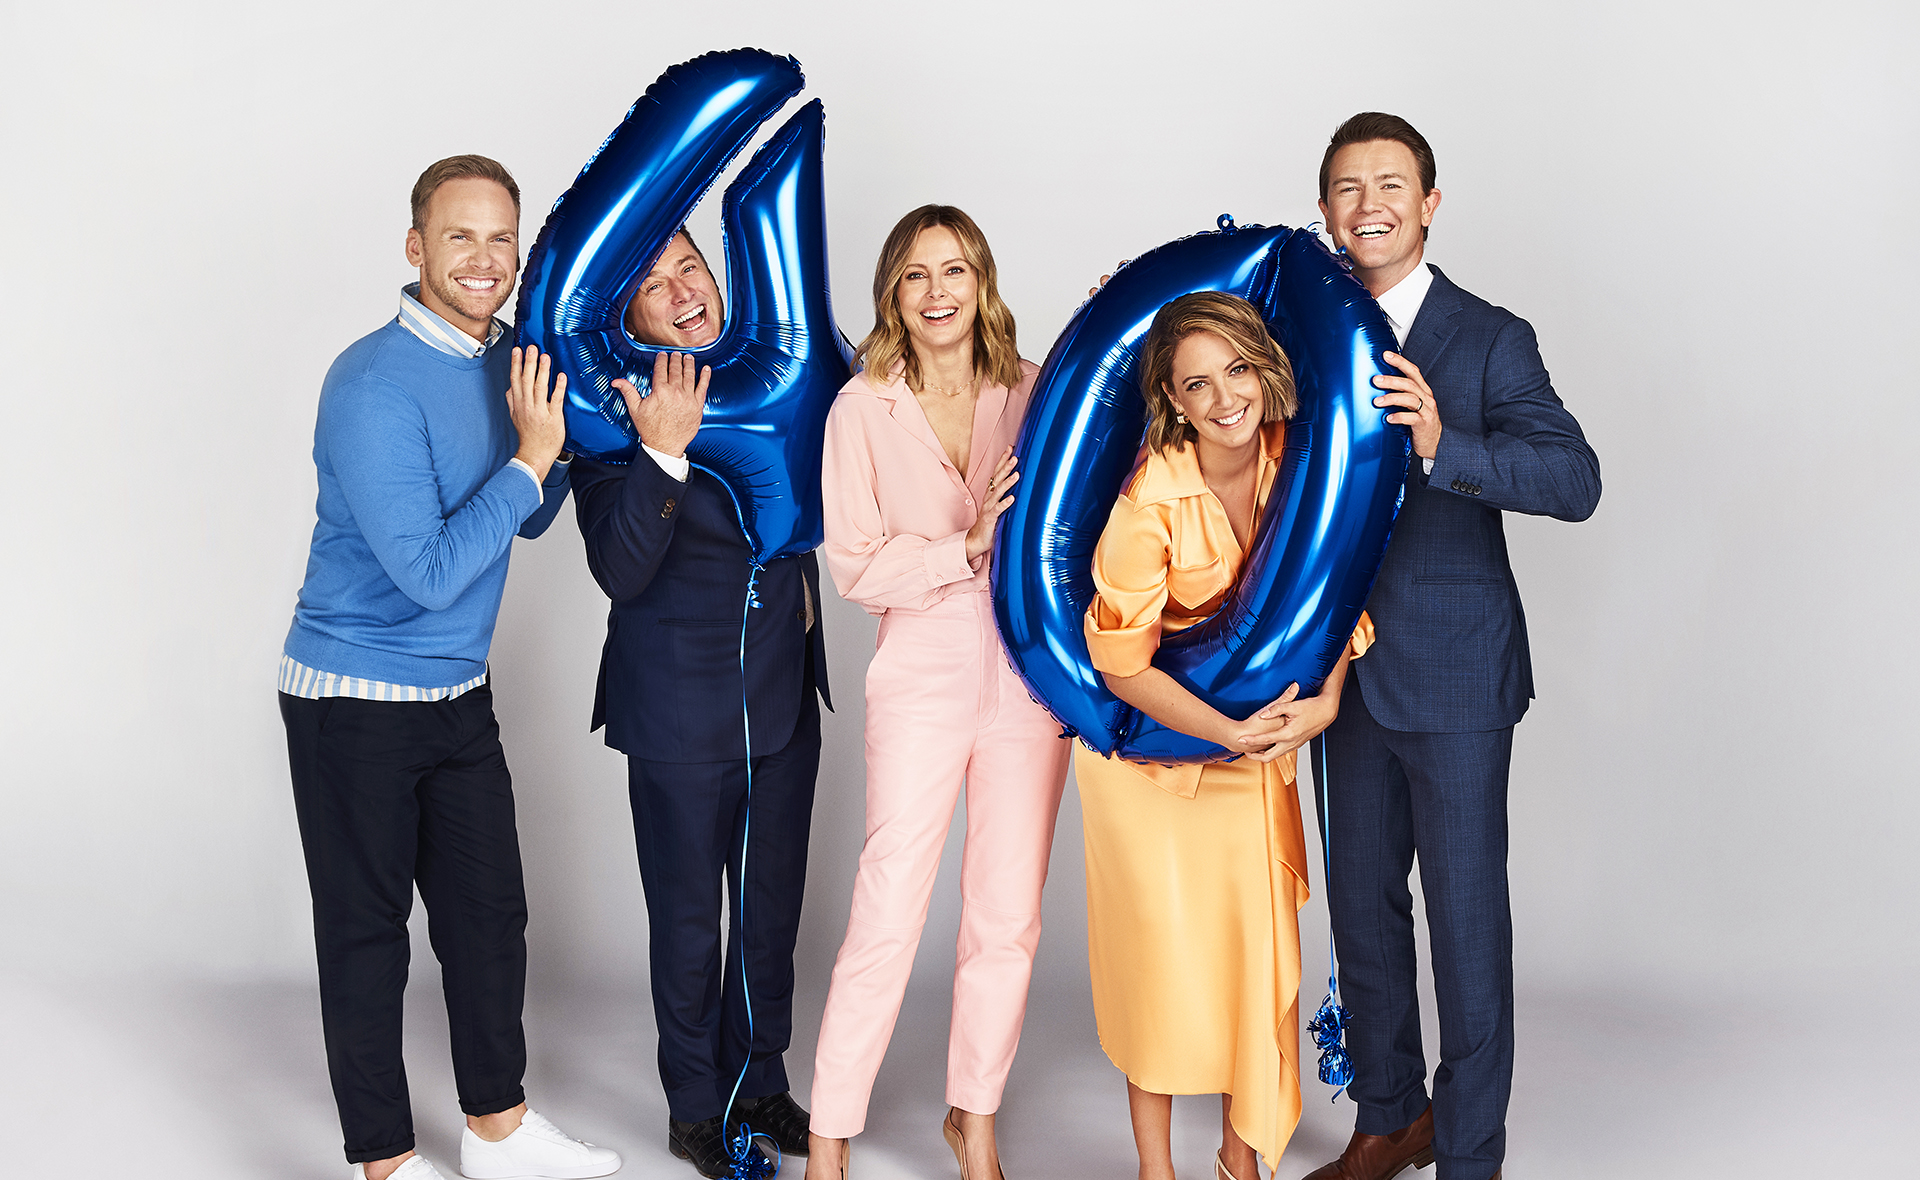 EXCLUSIVE: Karl Stefanovic reveals how he’s embracing getting older as the Today Show celebrates its 40th anniversary